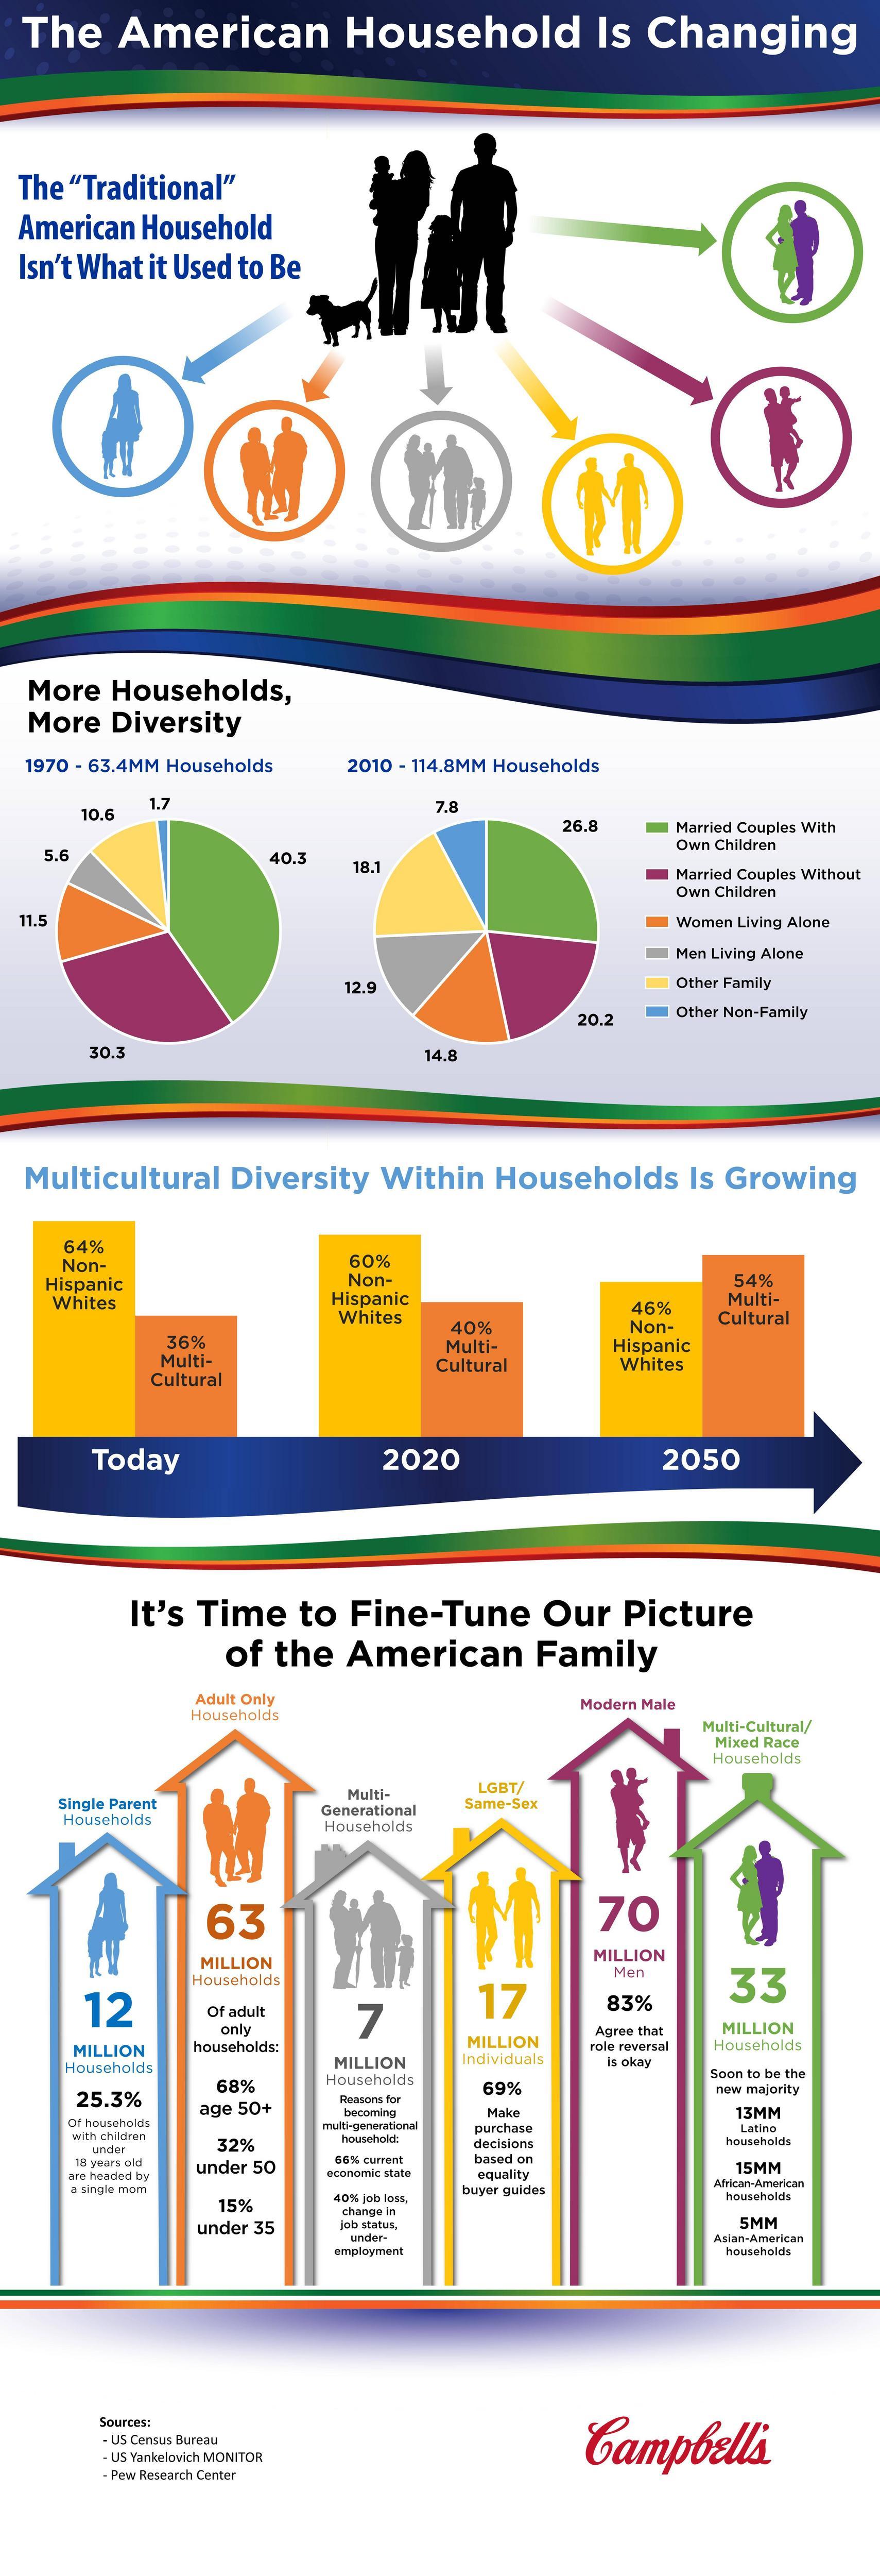 Campbell Company Logo - The Changing American Household Infographic | Campbell Soup Company